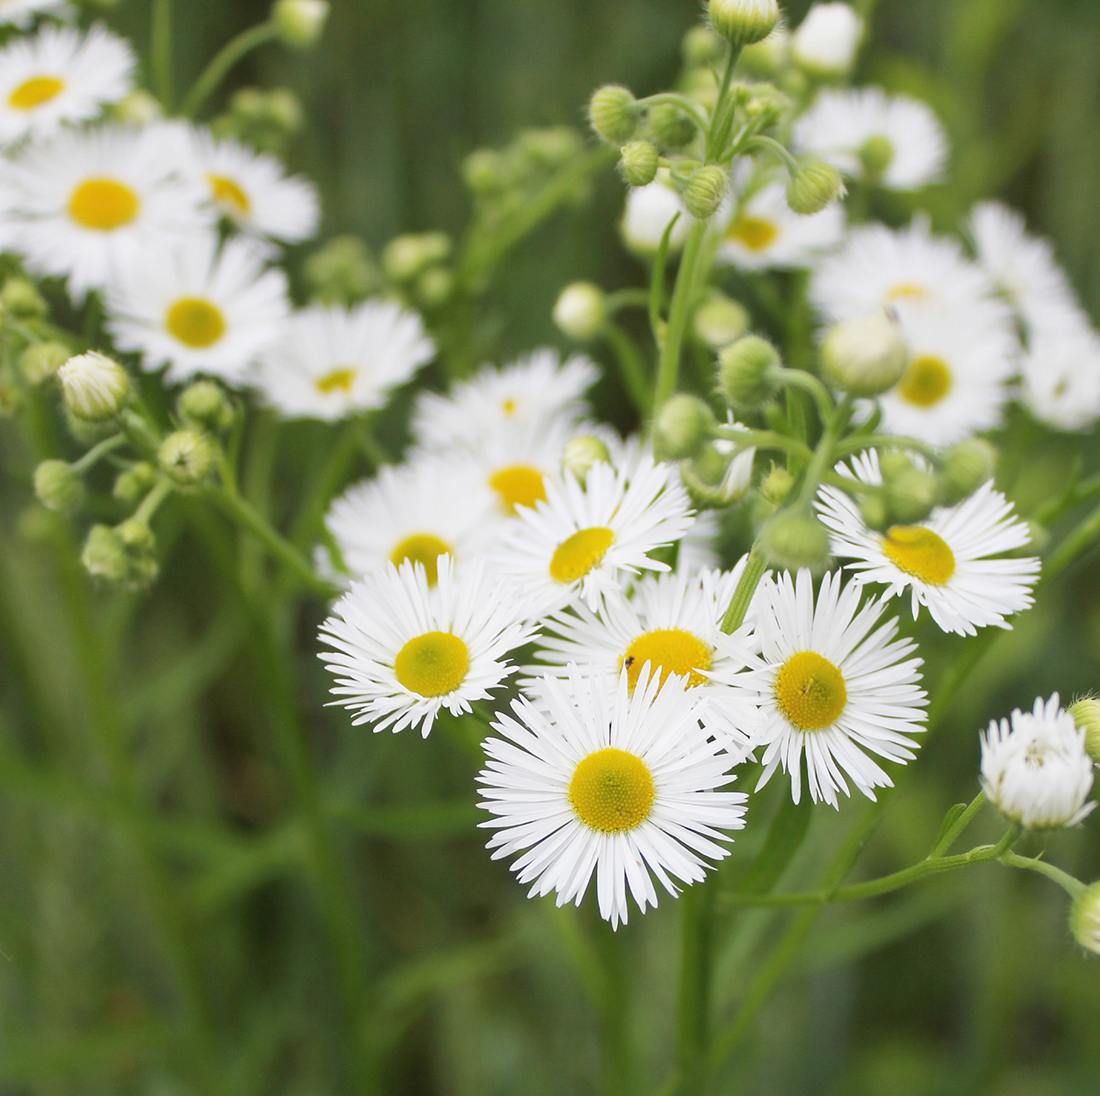 A cluster of annual fleabane's white, daisy-like inflorescences in late June